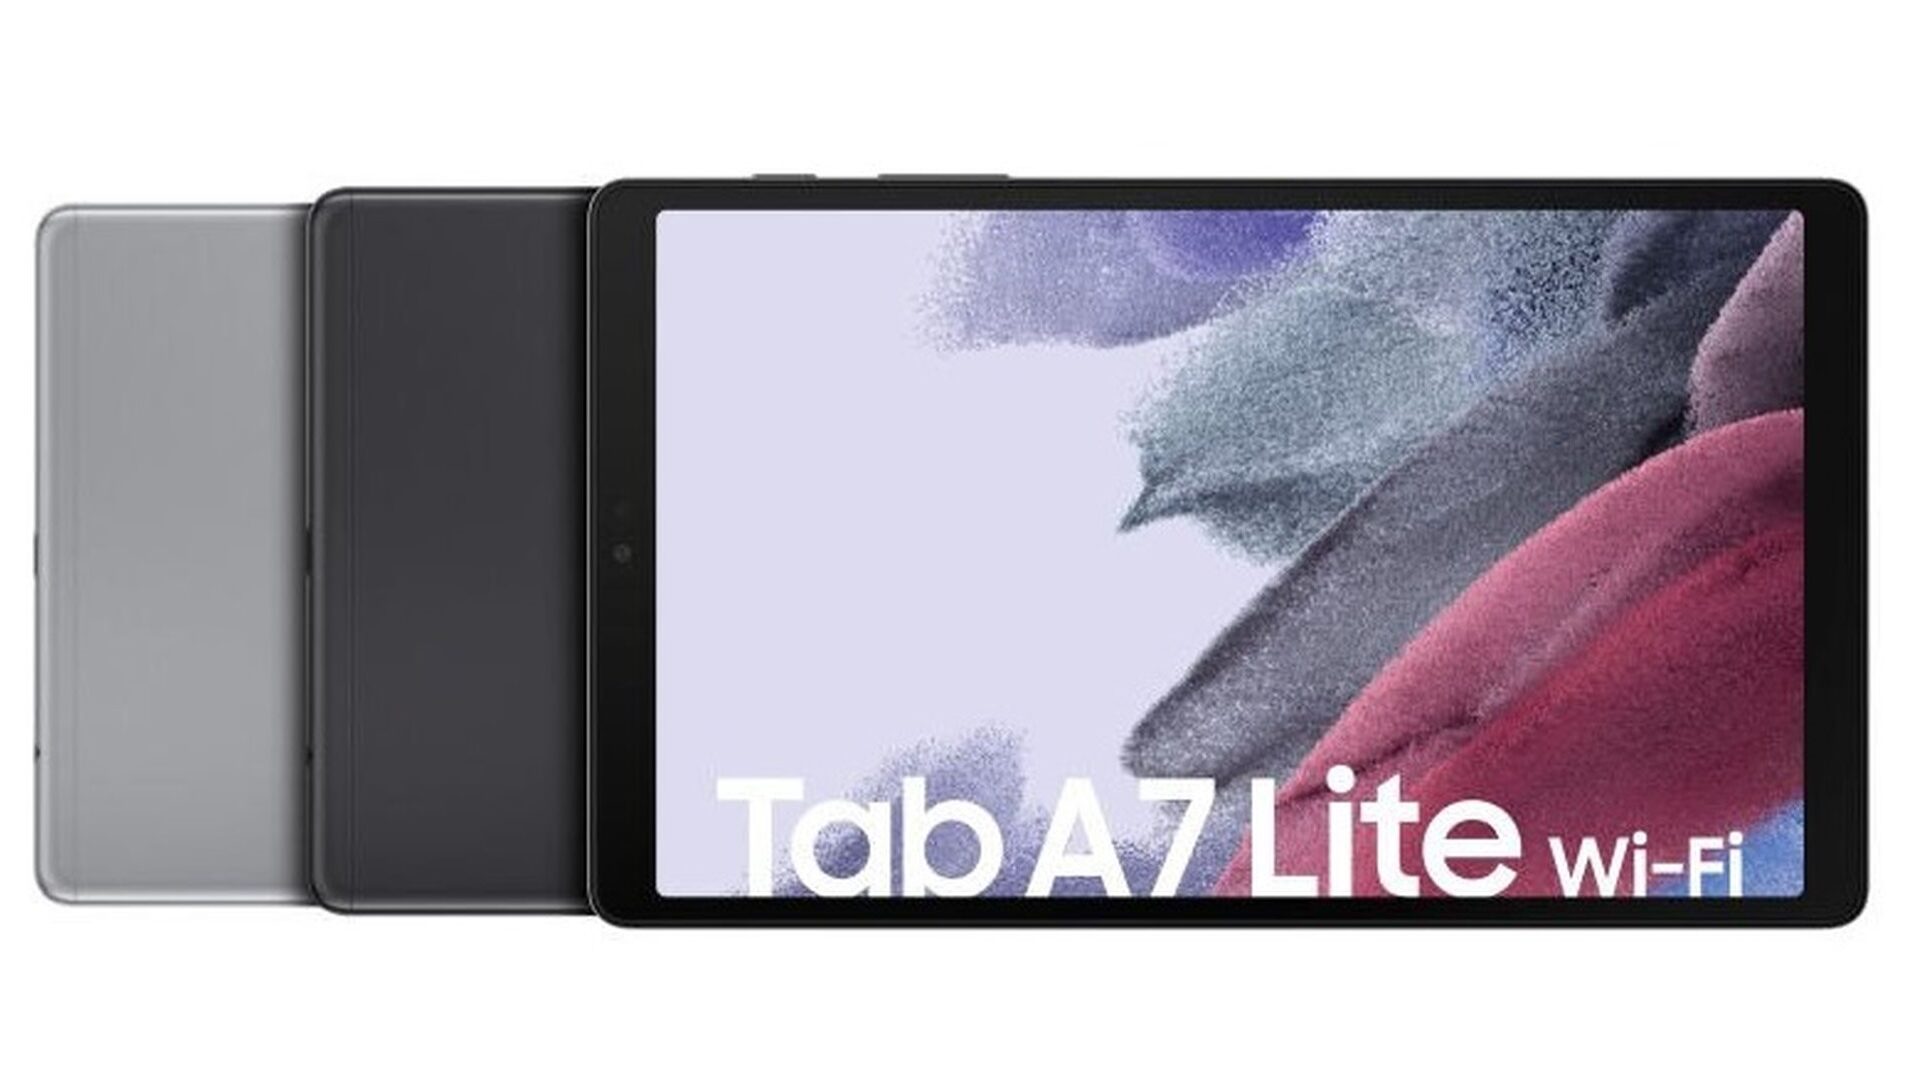 Samsung Galaxy Tab A7 Lite: also to be available in silver, according to  new renders -  News